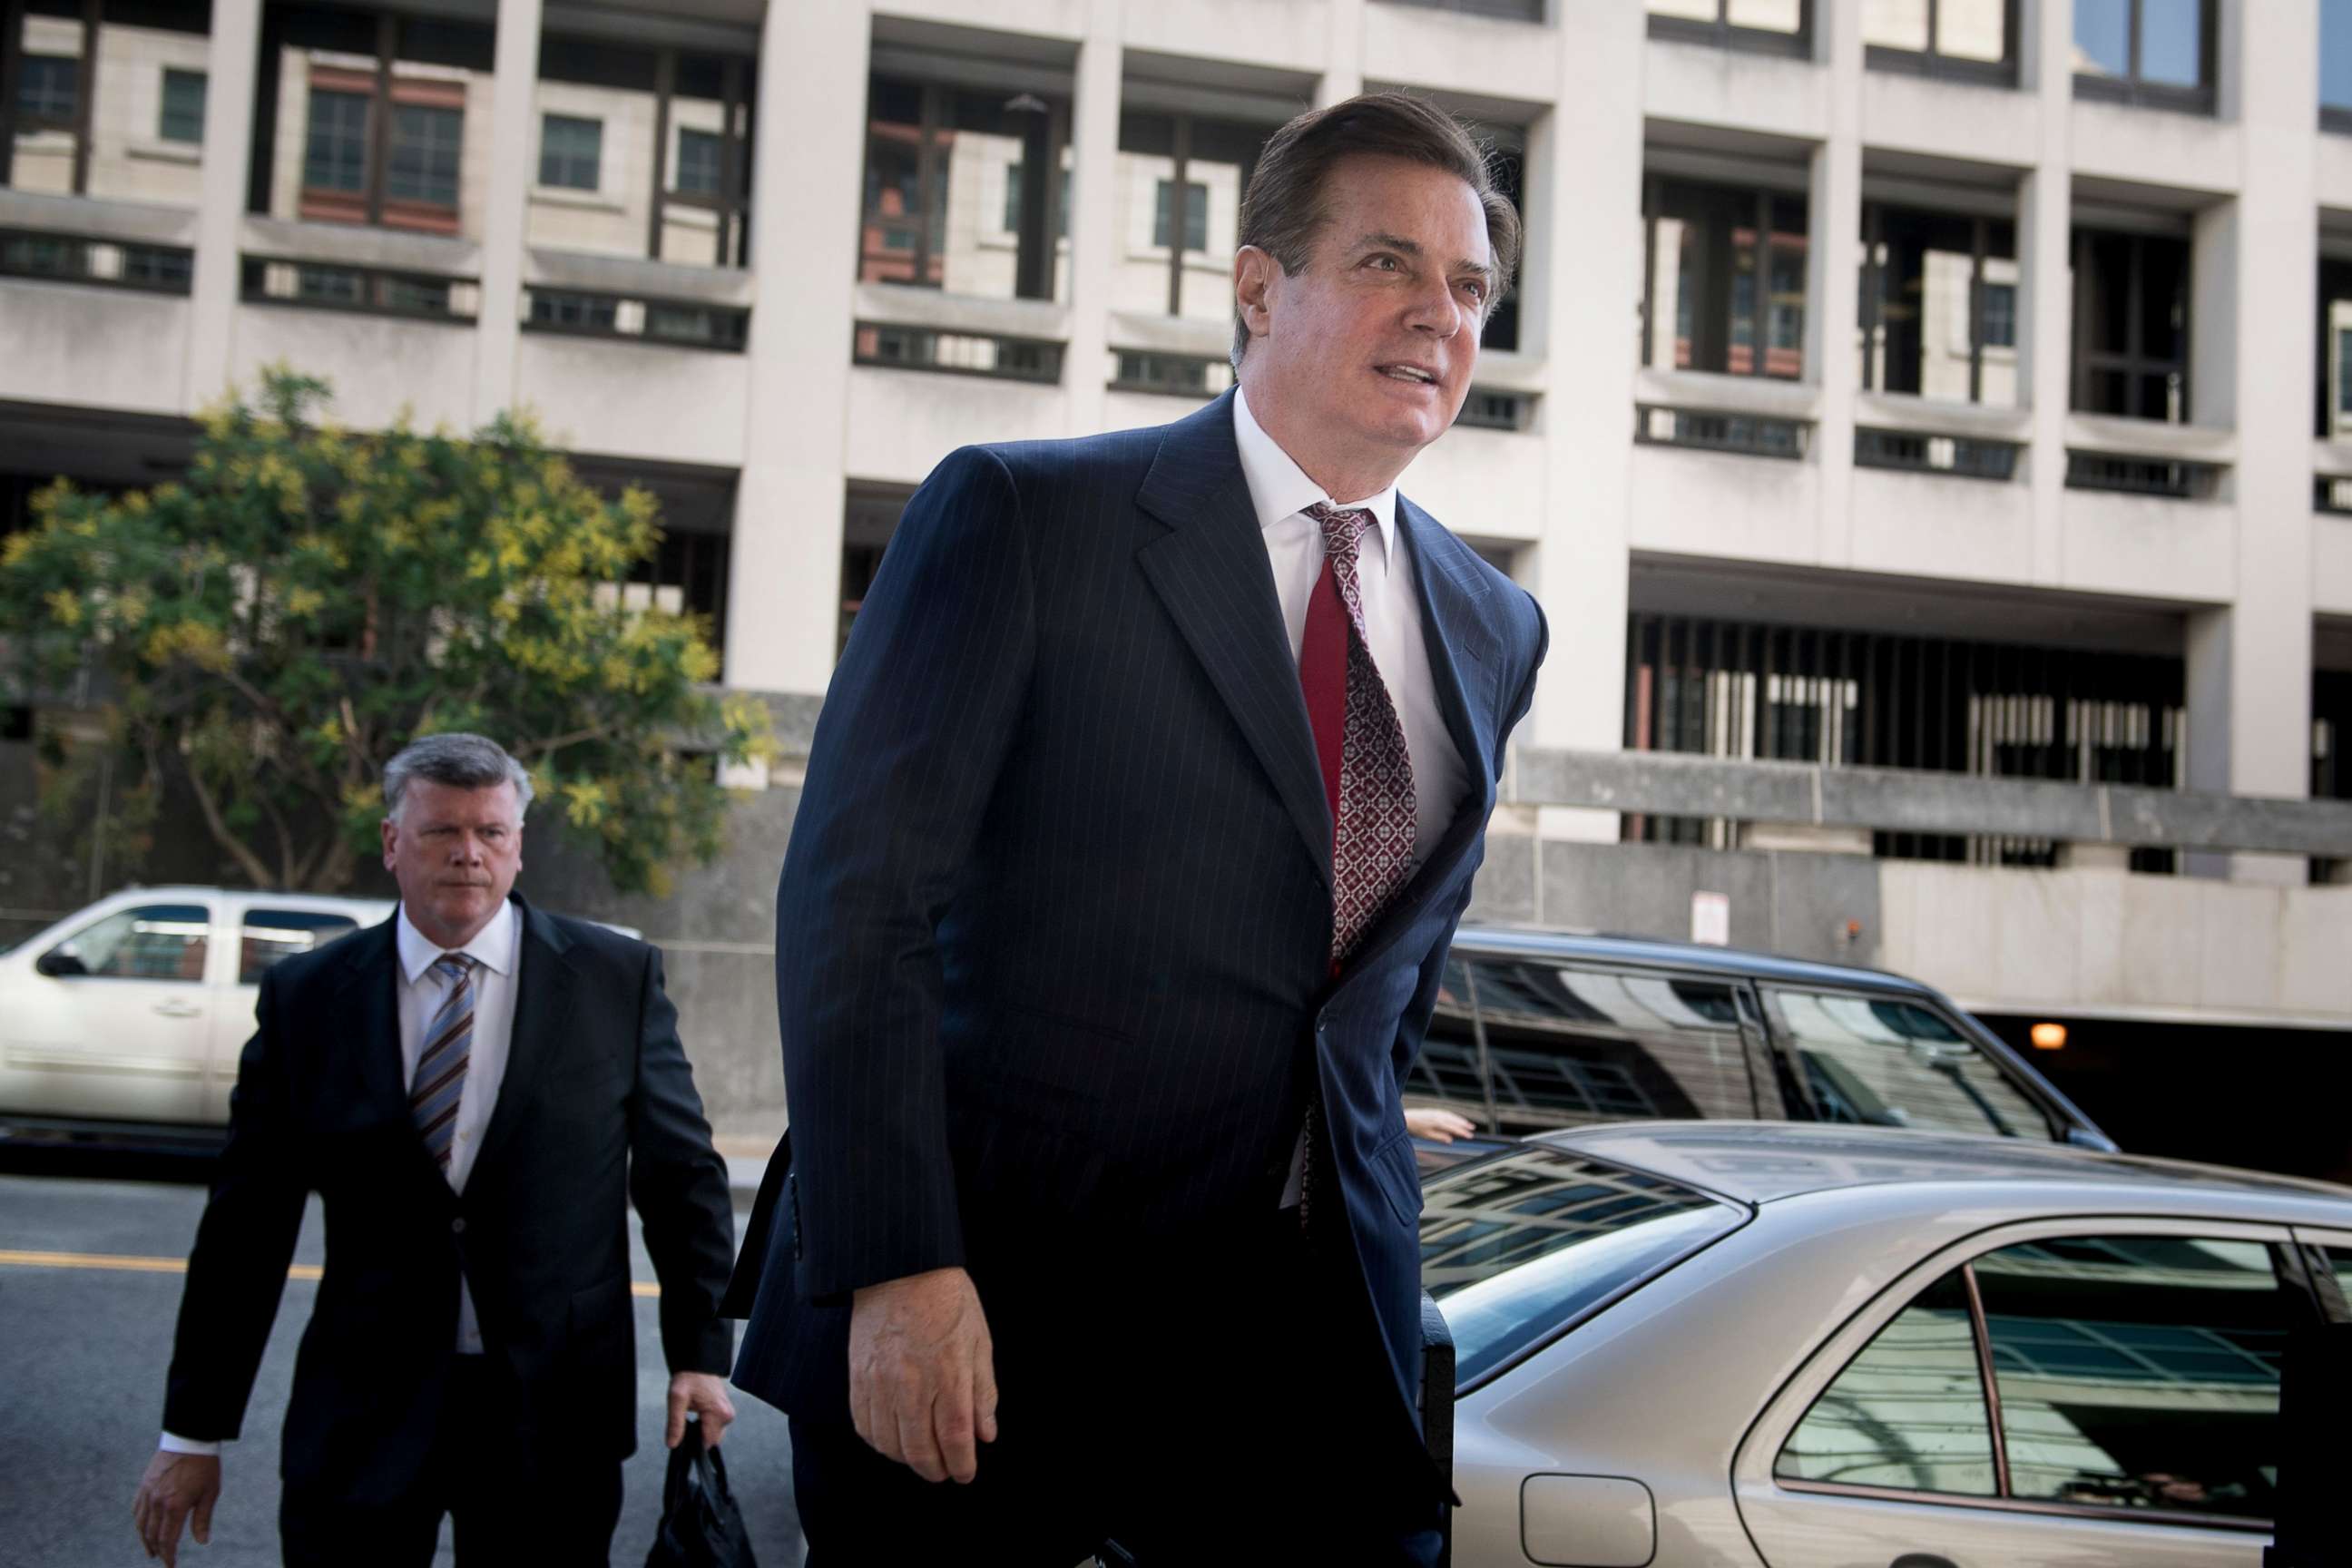 PHOTO: Paul Manafort, Donald Trump's former campaign chief, arrives for a hearing at U.S. District Court in Washington D.C., June 15, 2018.